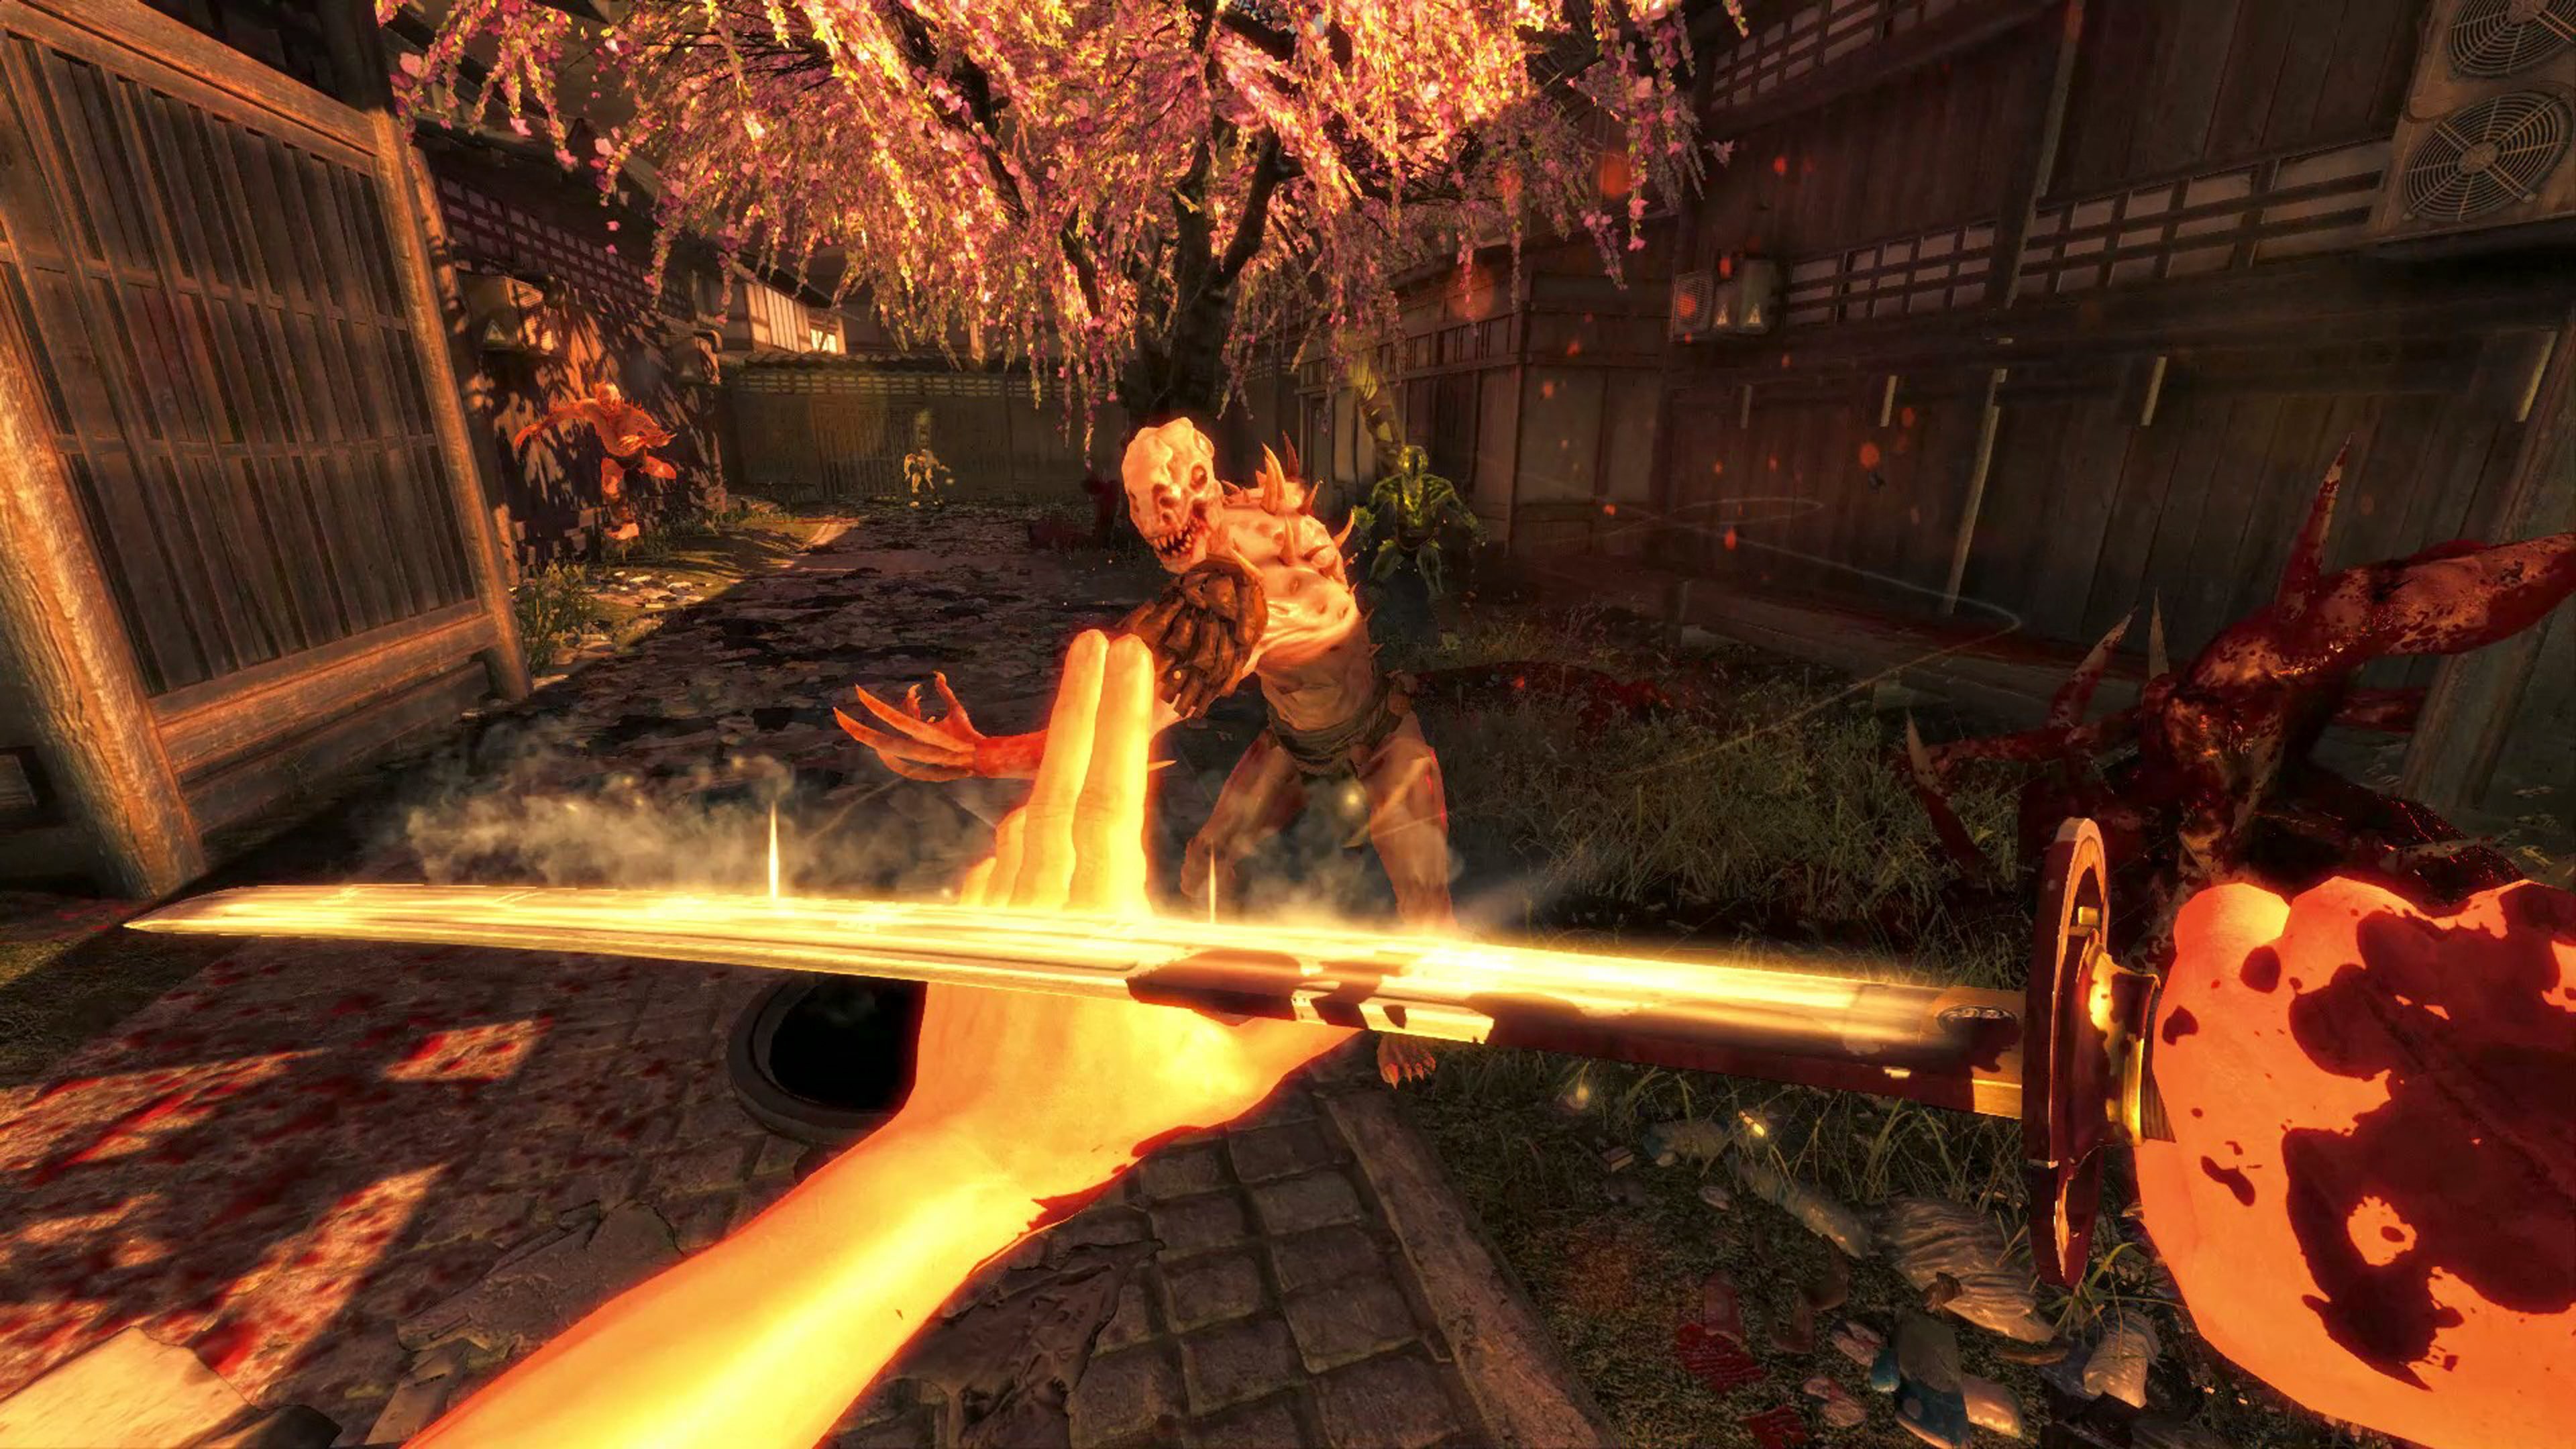 Buy Shadow Warrior 3 from the Humble Store